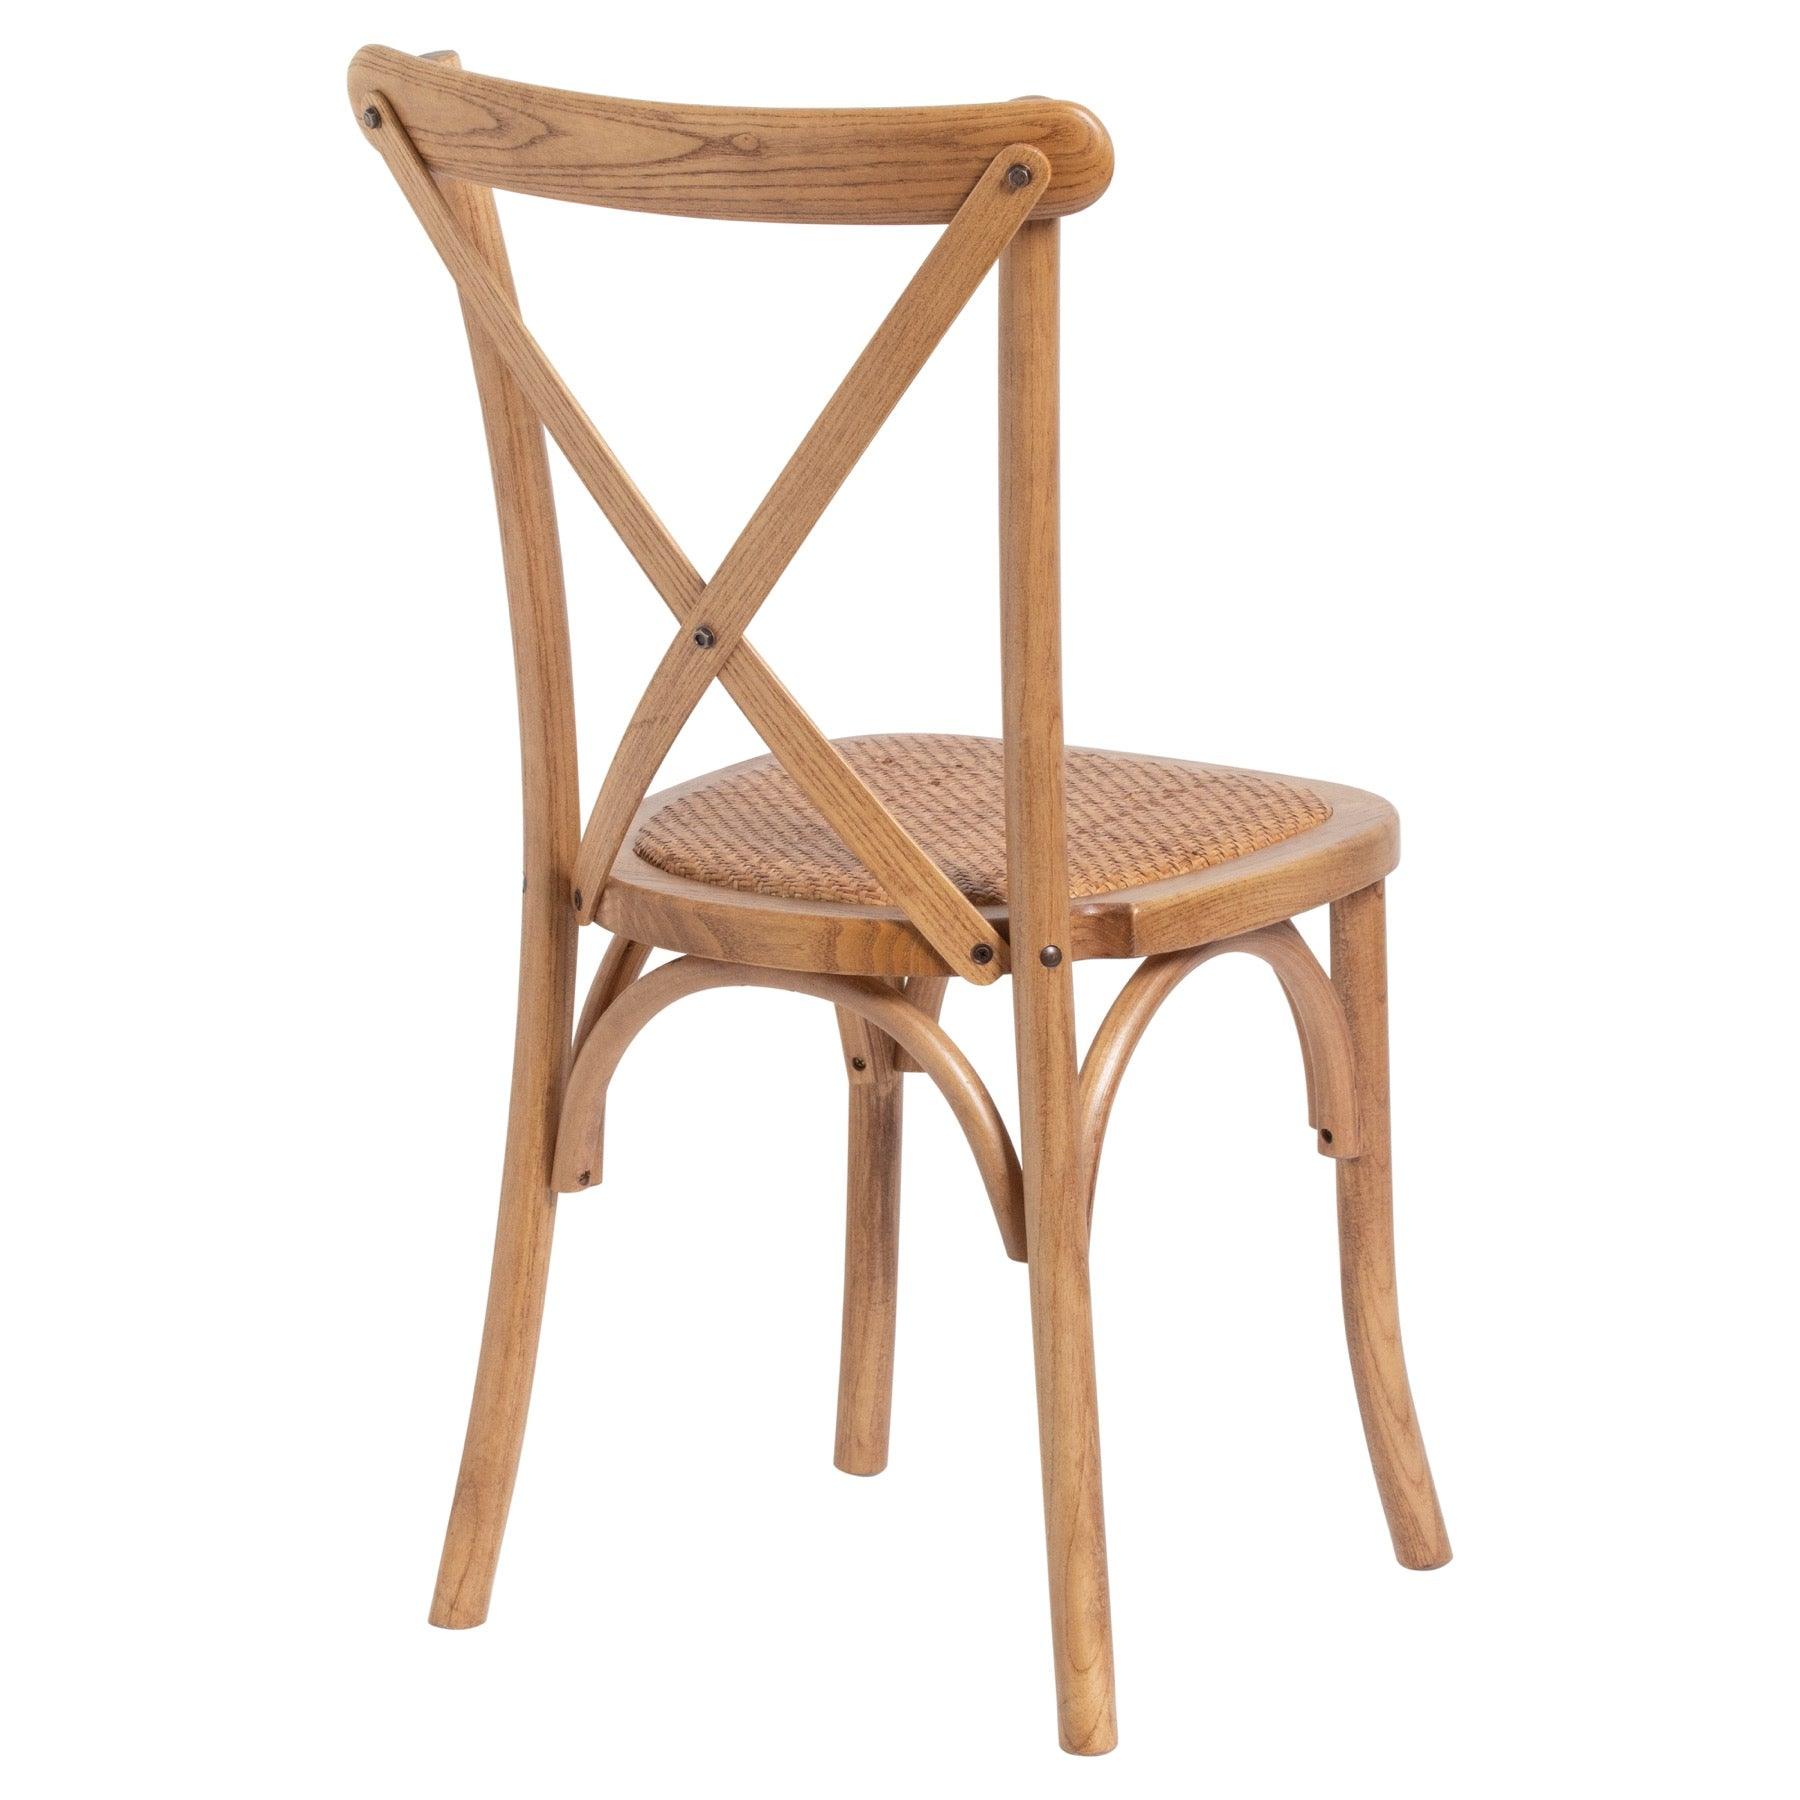 Light Oak Cross Back Dining Chair - Vookoo Lifestyle